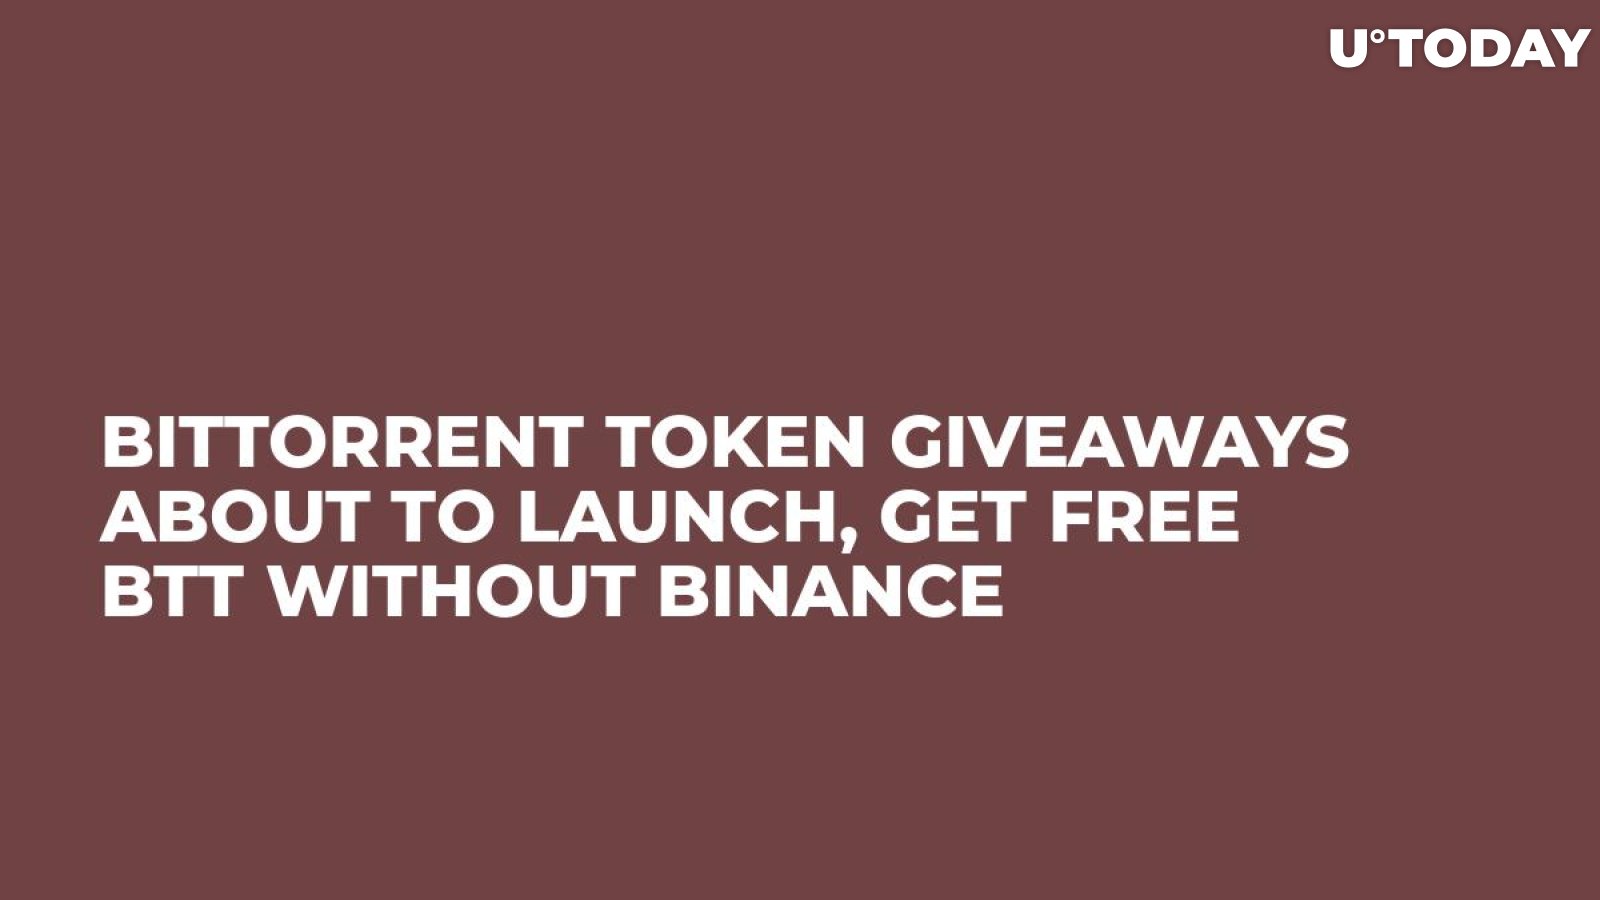 BitTorrent Token Giveaways About to Launch, Get Free BTT Without Binance